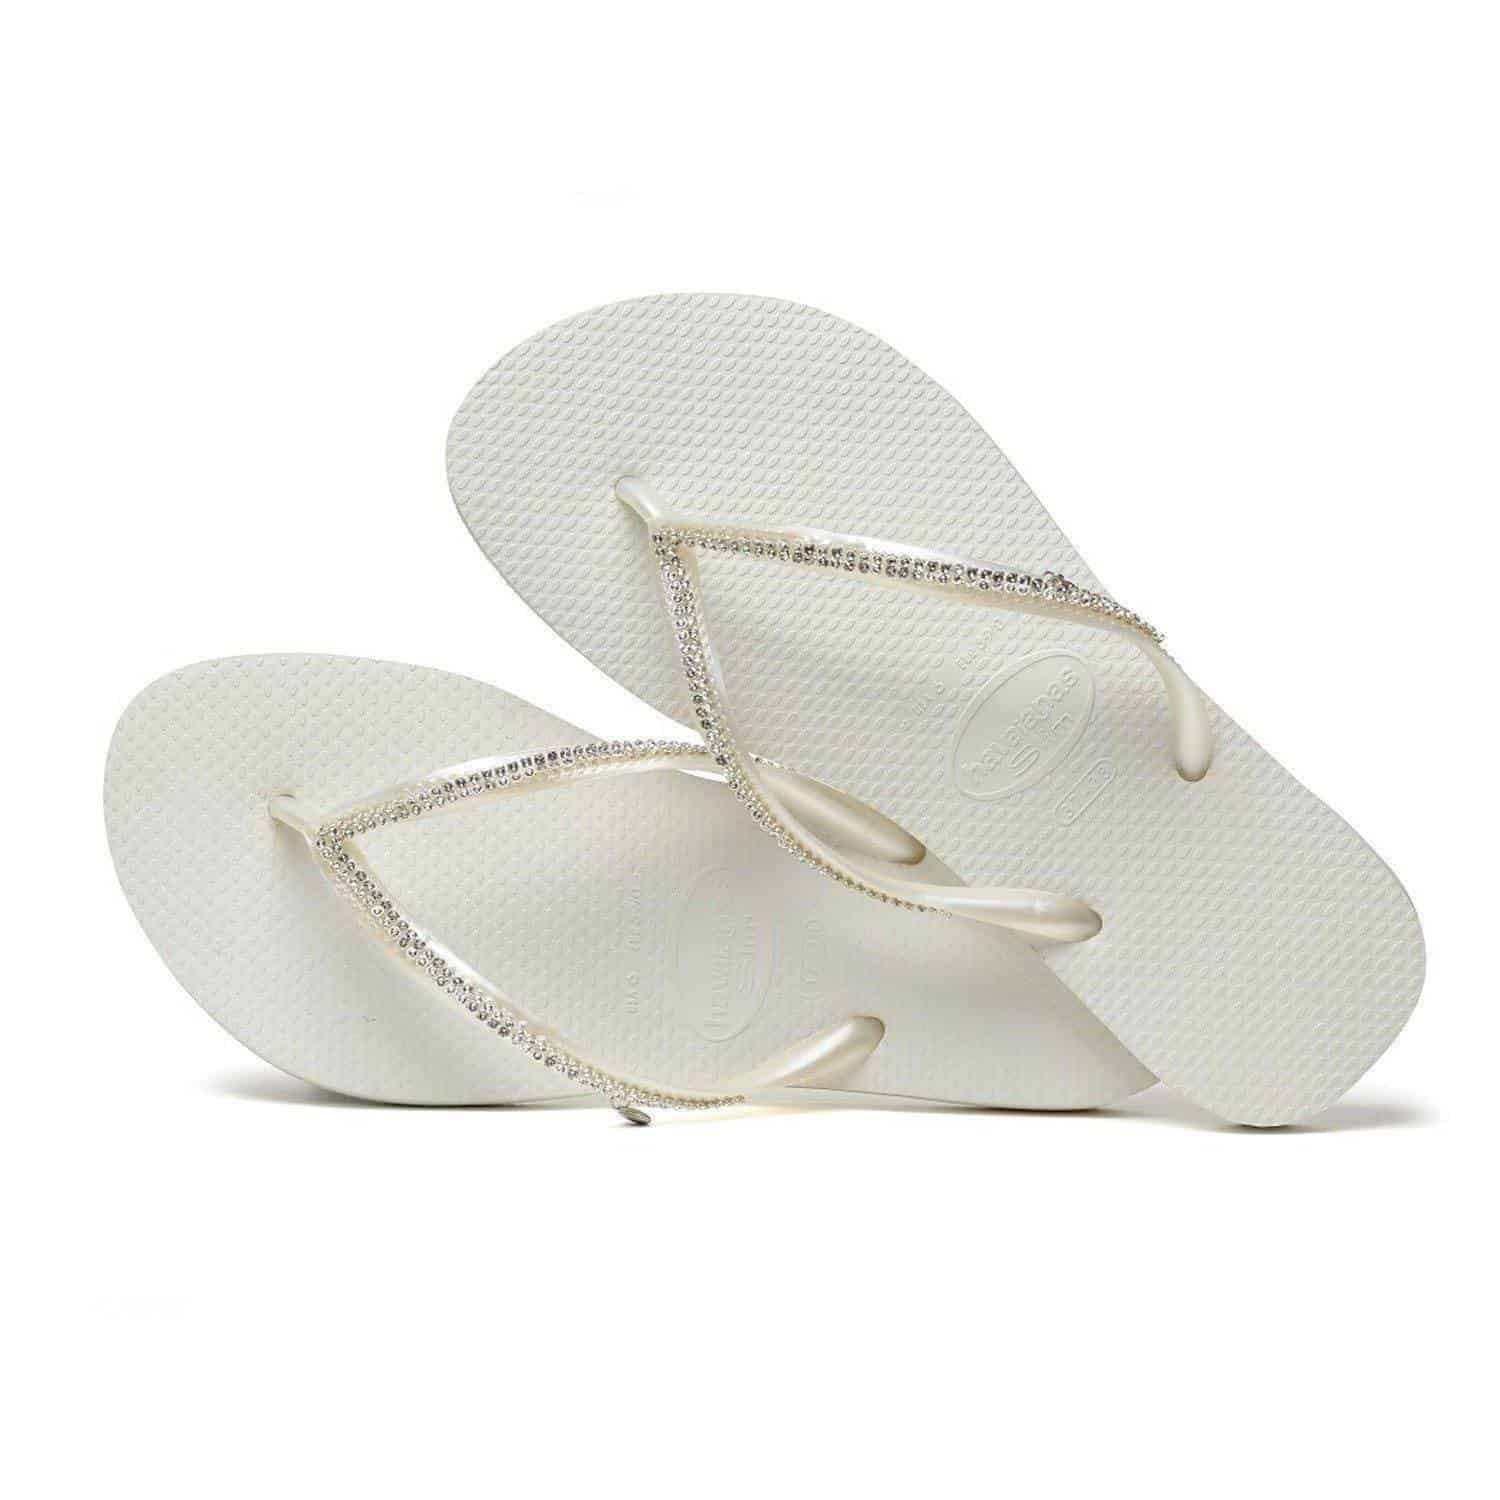 Keep your feet classy in Havaianas